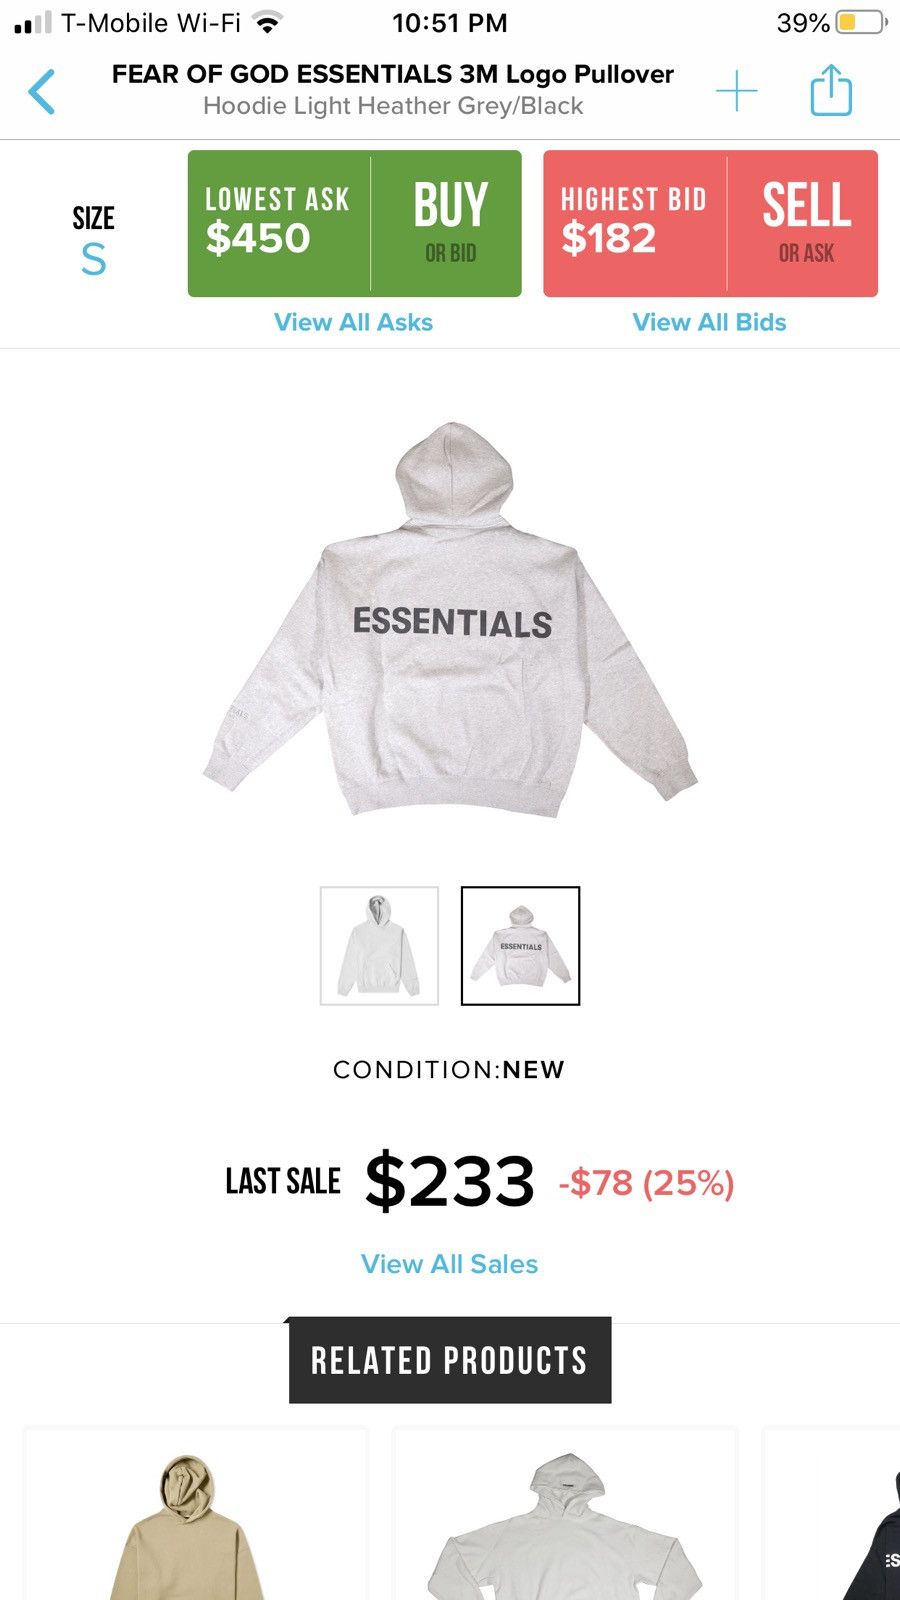 Fear of God Fear of God Essentials 3m Hoodie Size US S / EU 44-46 / 1 - 8 Preview